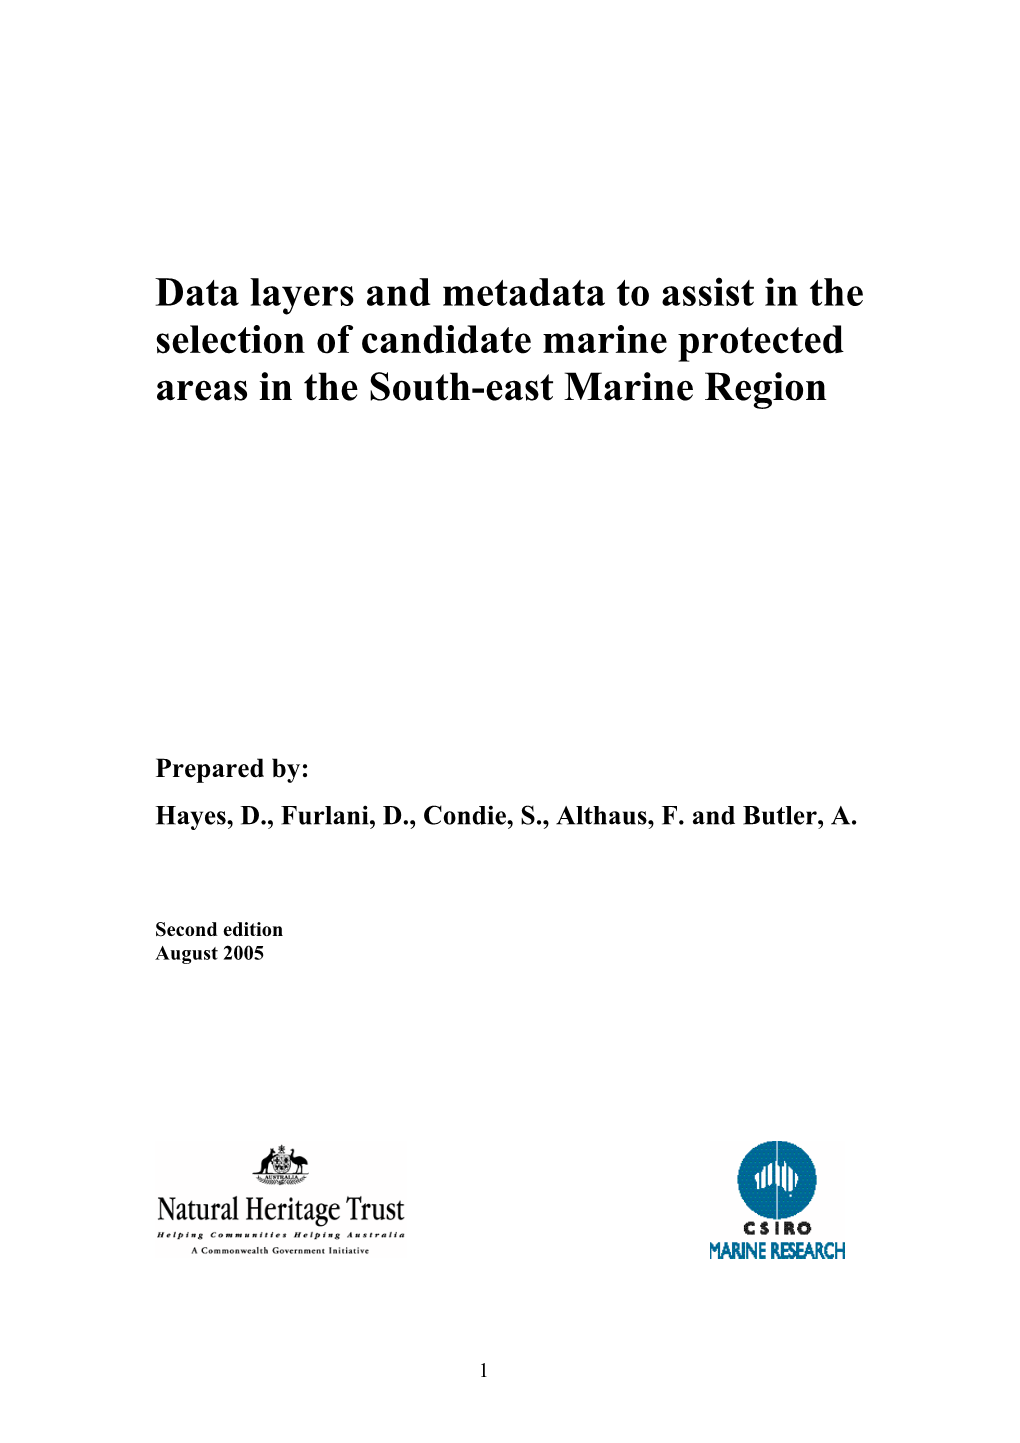 Data Layers and Metadata to Assist in the Selection of Candidate Marine Protected Areas in the South-East Marine Region